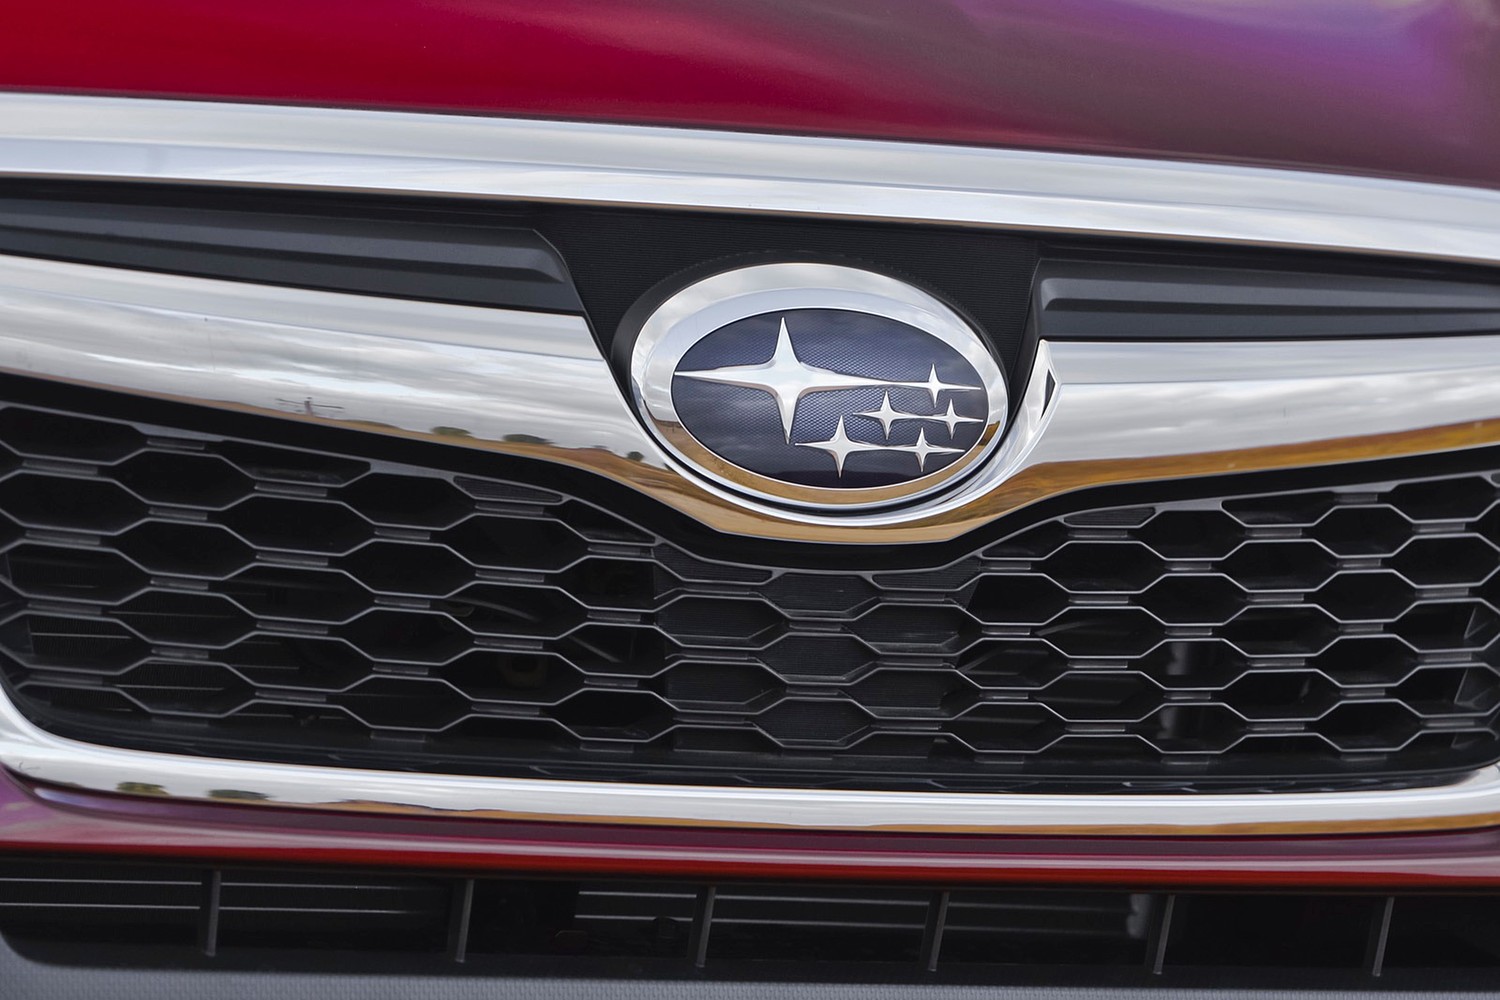 Subaru Forester 2.0XT Touring 4dr SUV Front Badge (2015 model year shown)